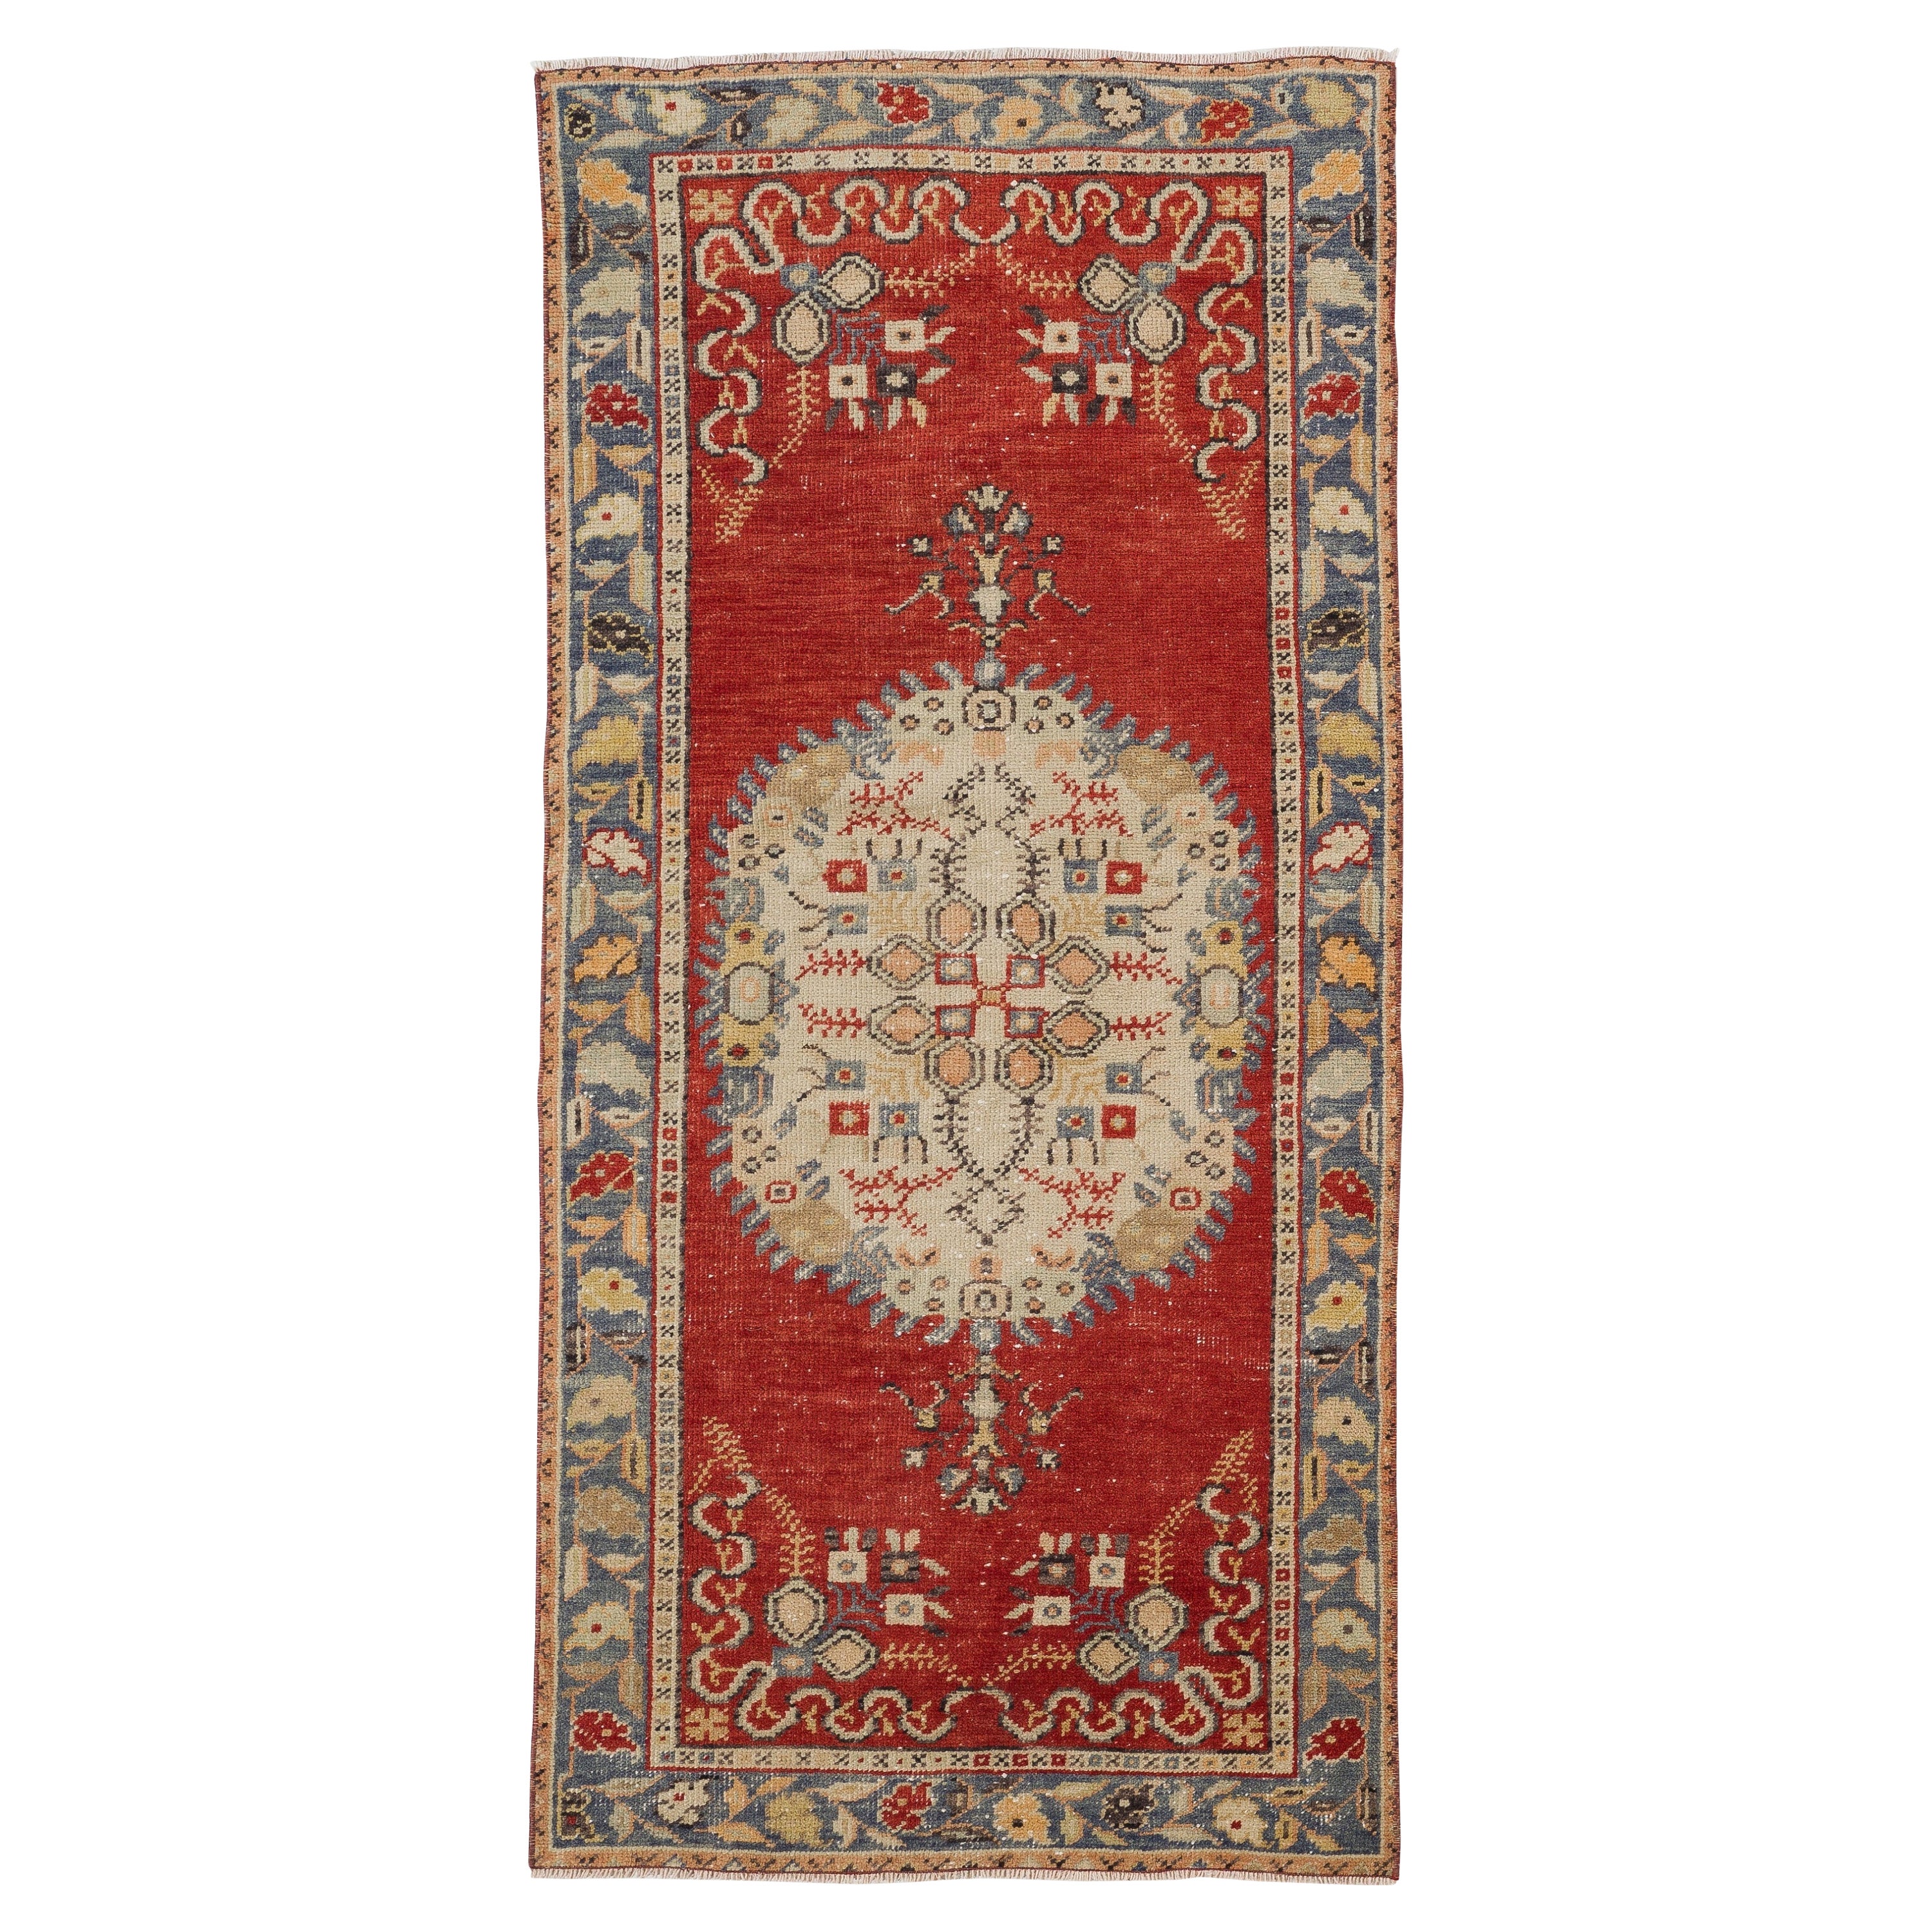 3x6.4 Ft Vintage Handmade Unique Turkish Wool Accent Rug in Red and Ivory